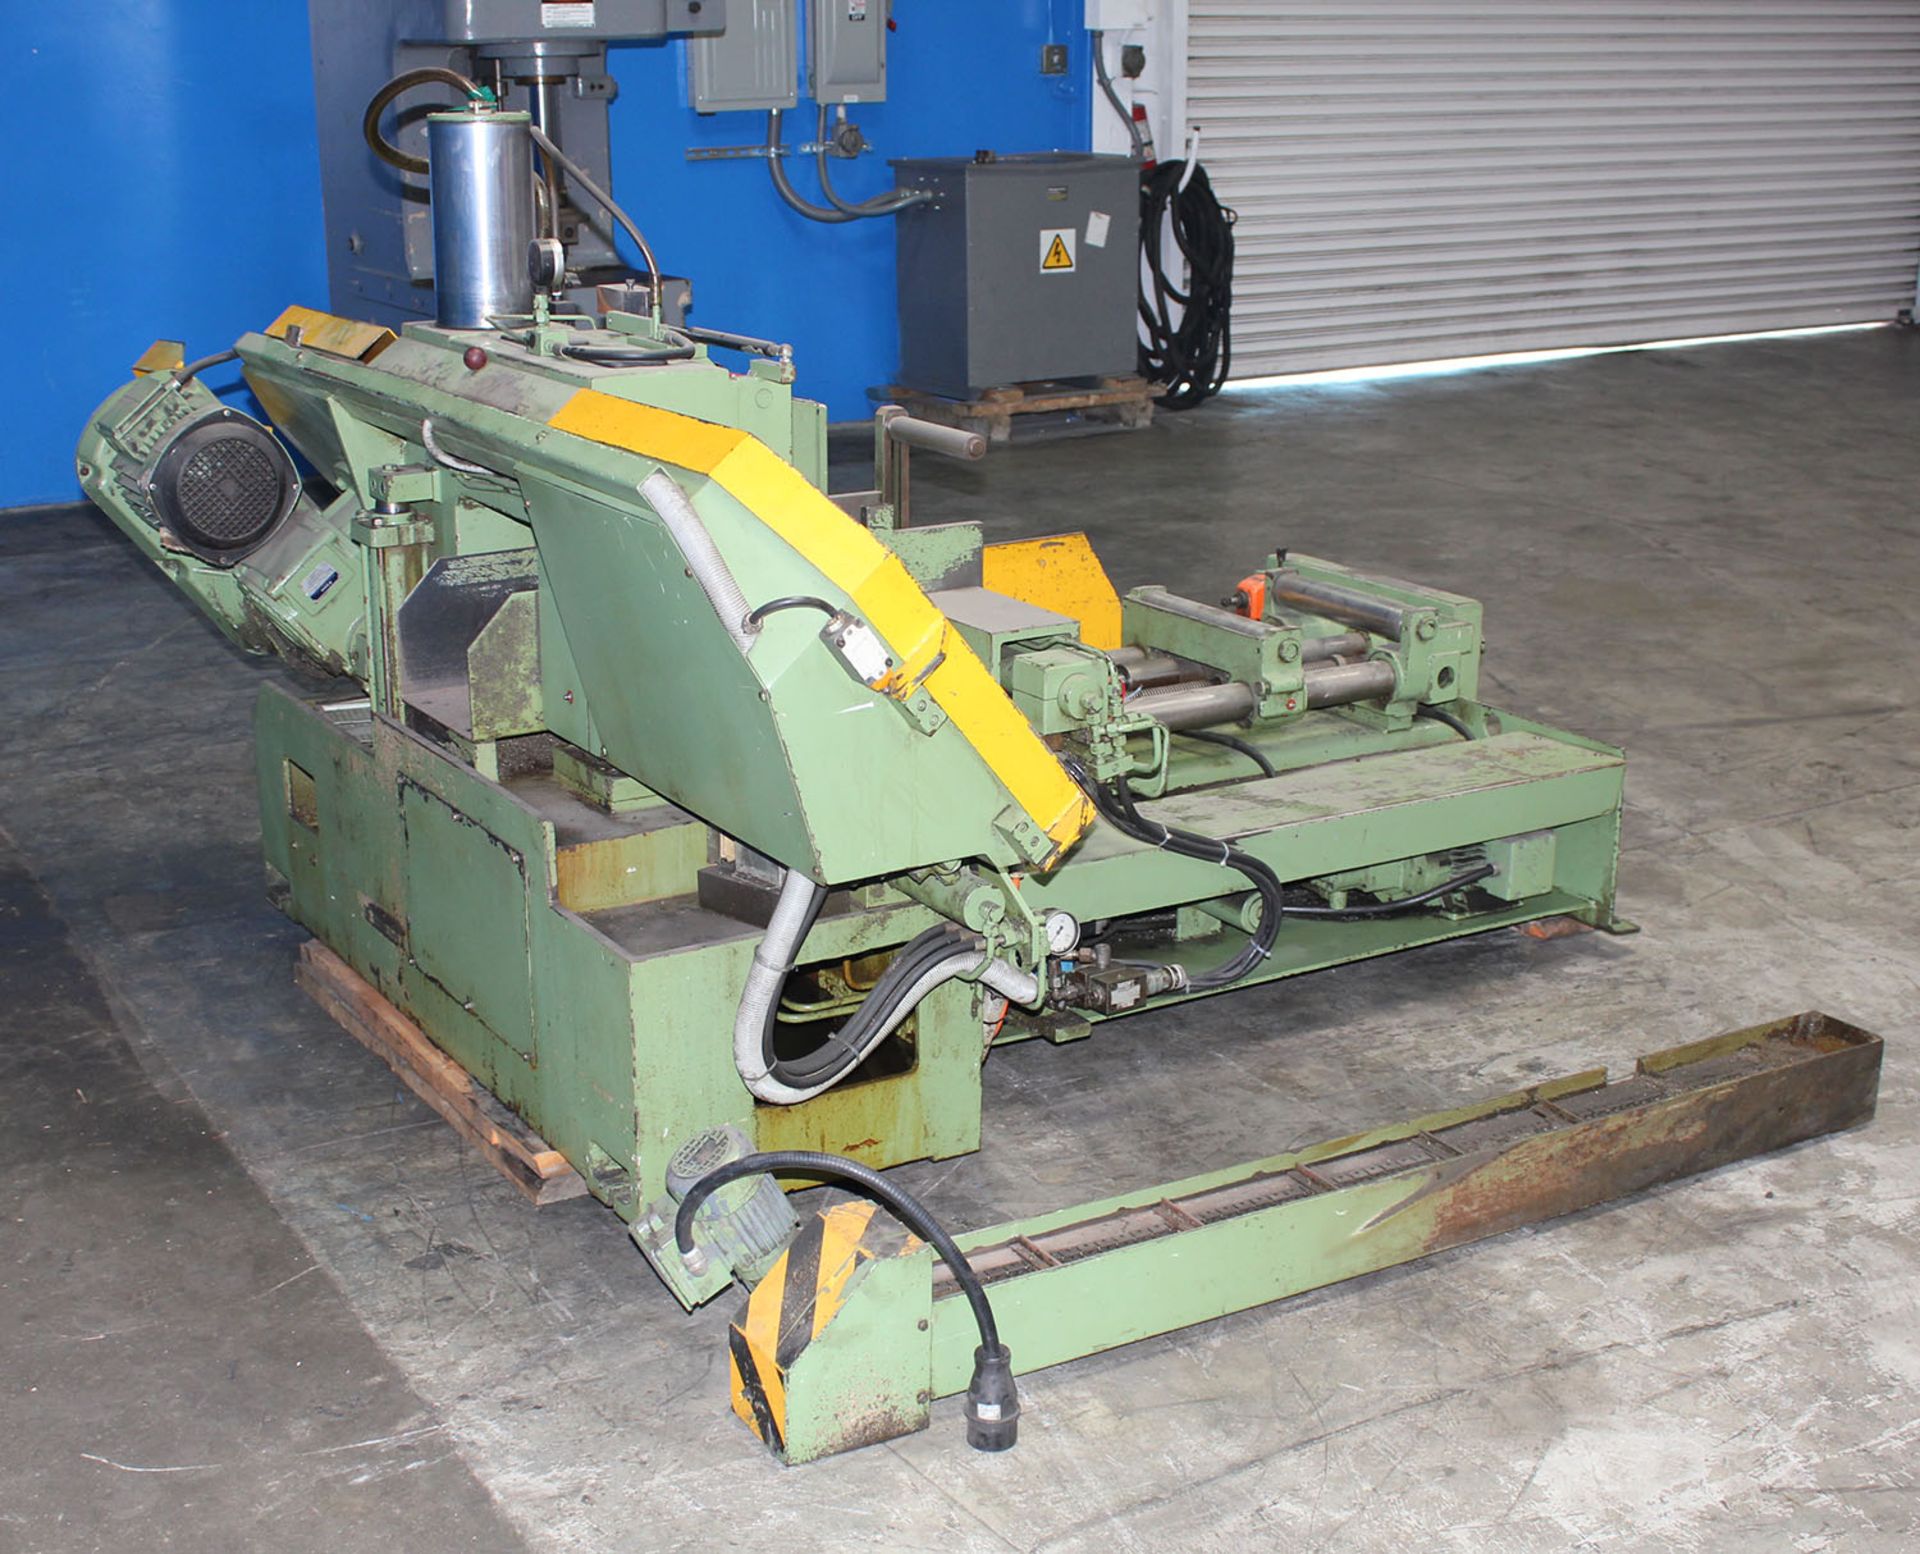 12'' x 10" Behringer Auto. Horiz. Metal Cutting Band Saw - Located In: Huntington Park, CA - Image 5 of 7